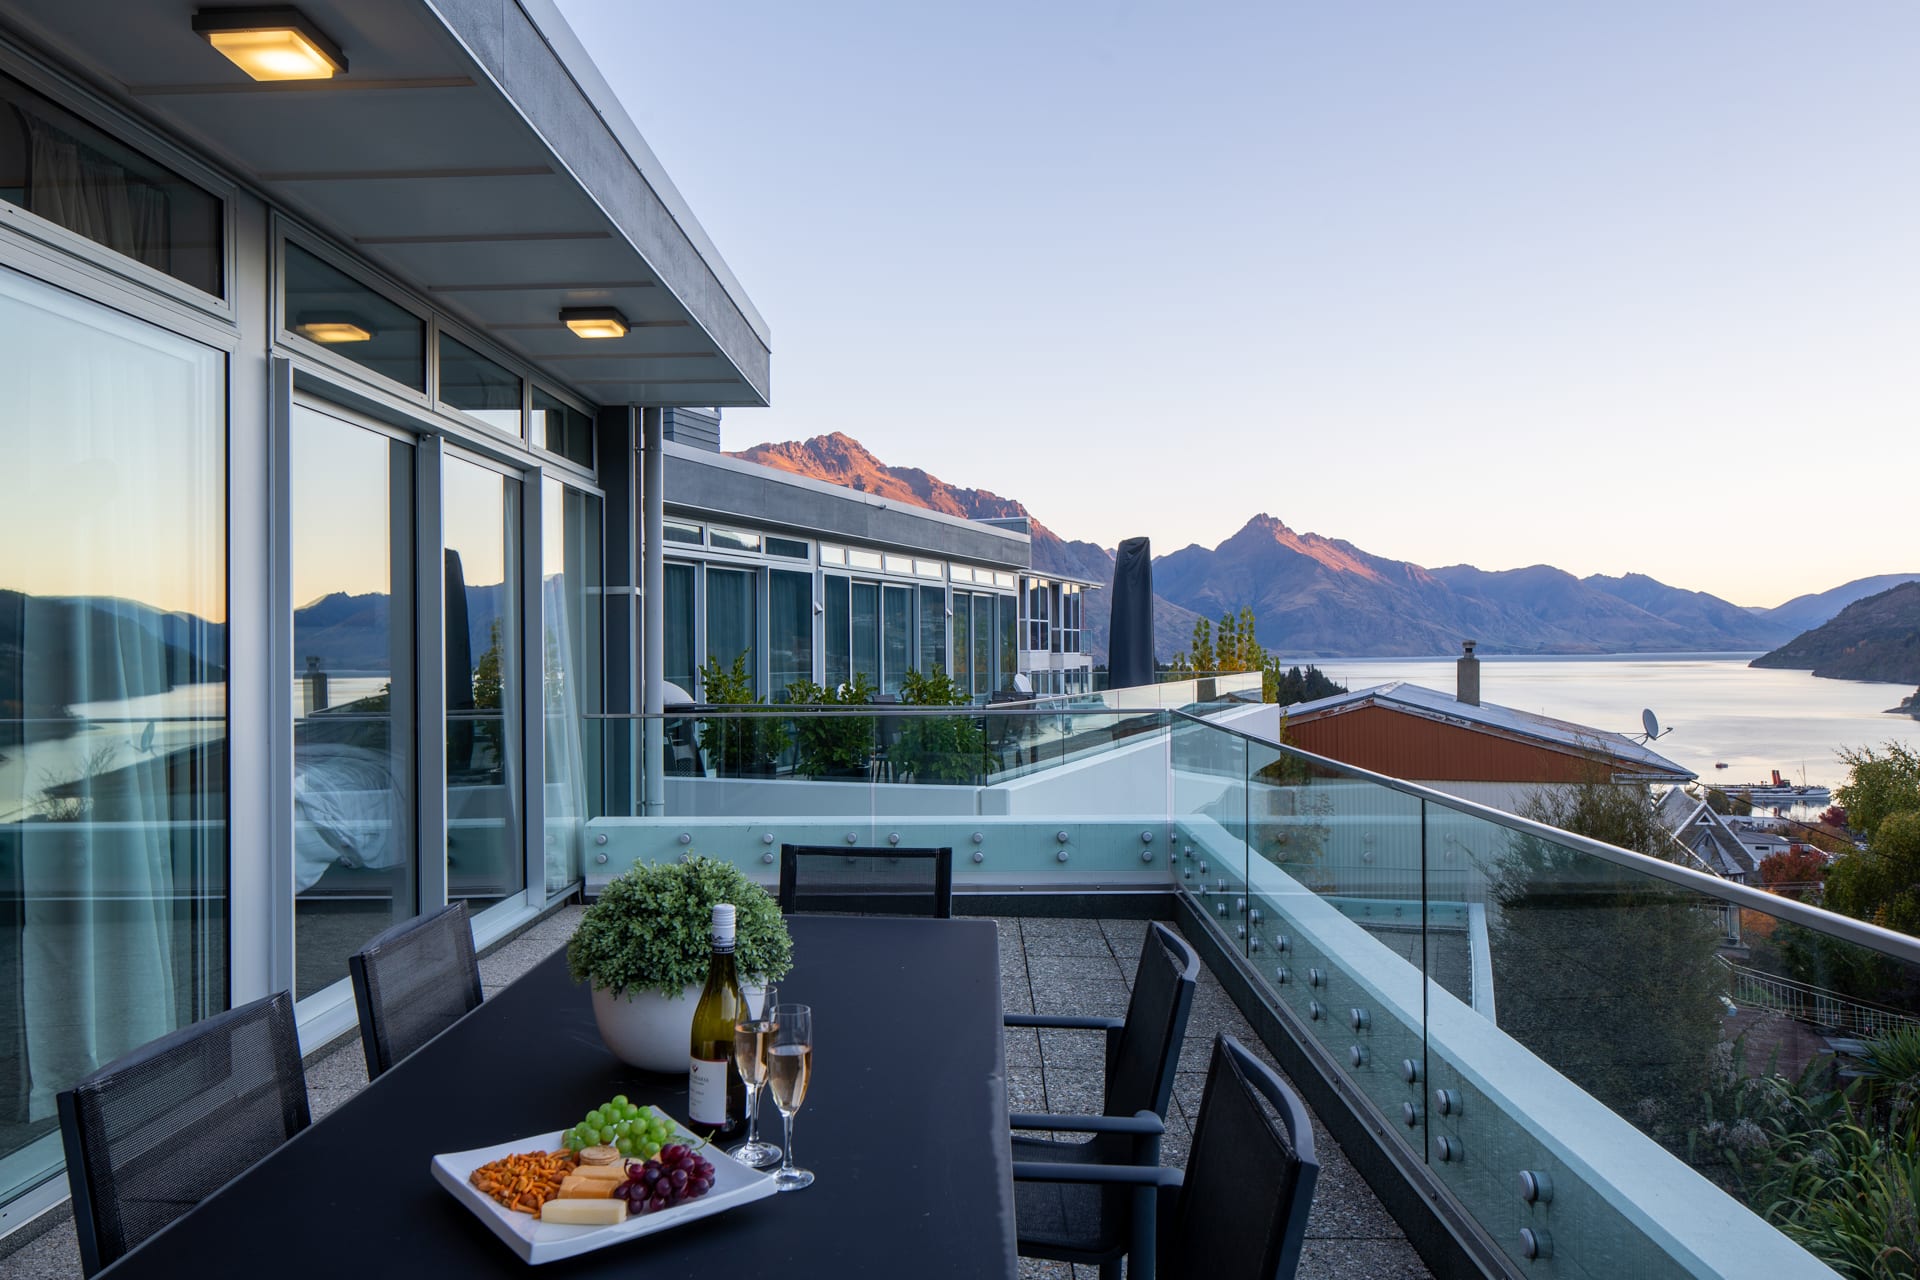 Stunning mountain views from the outdoor patio